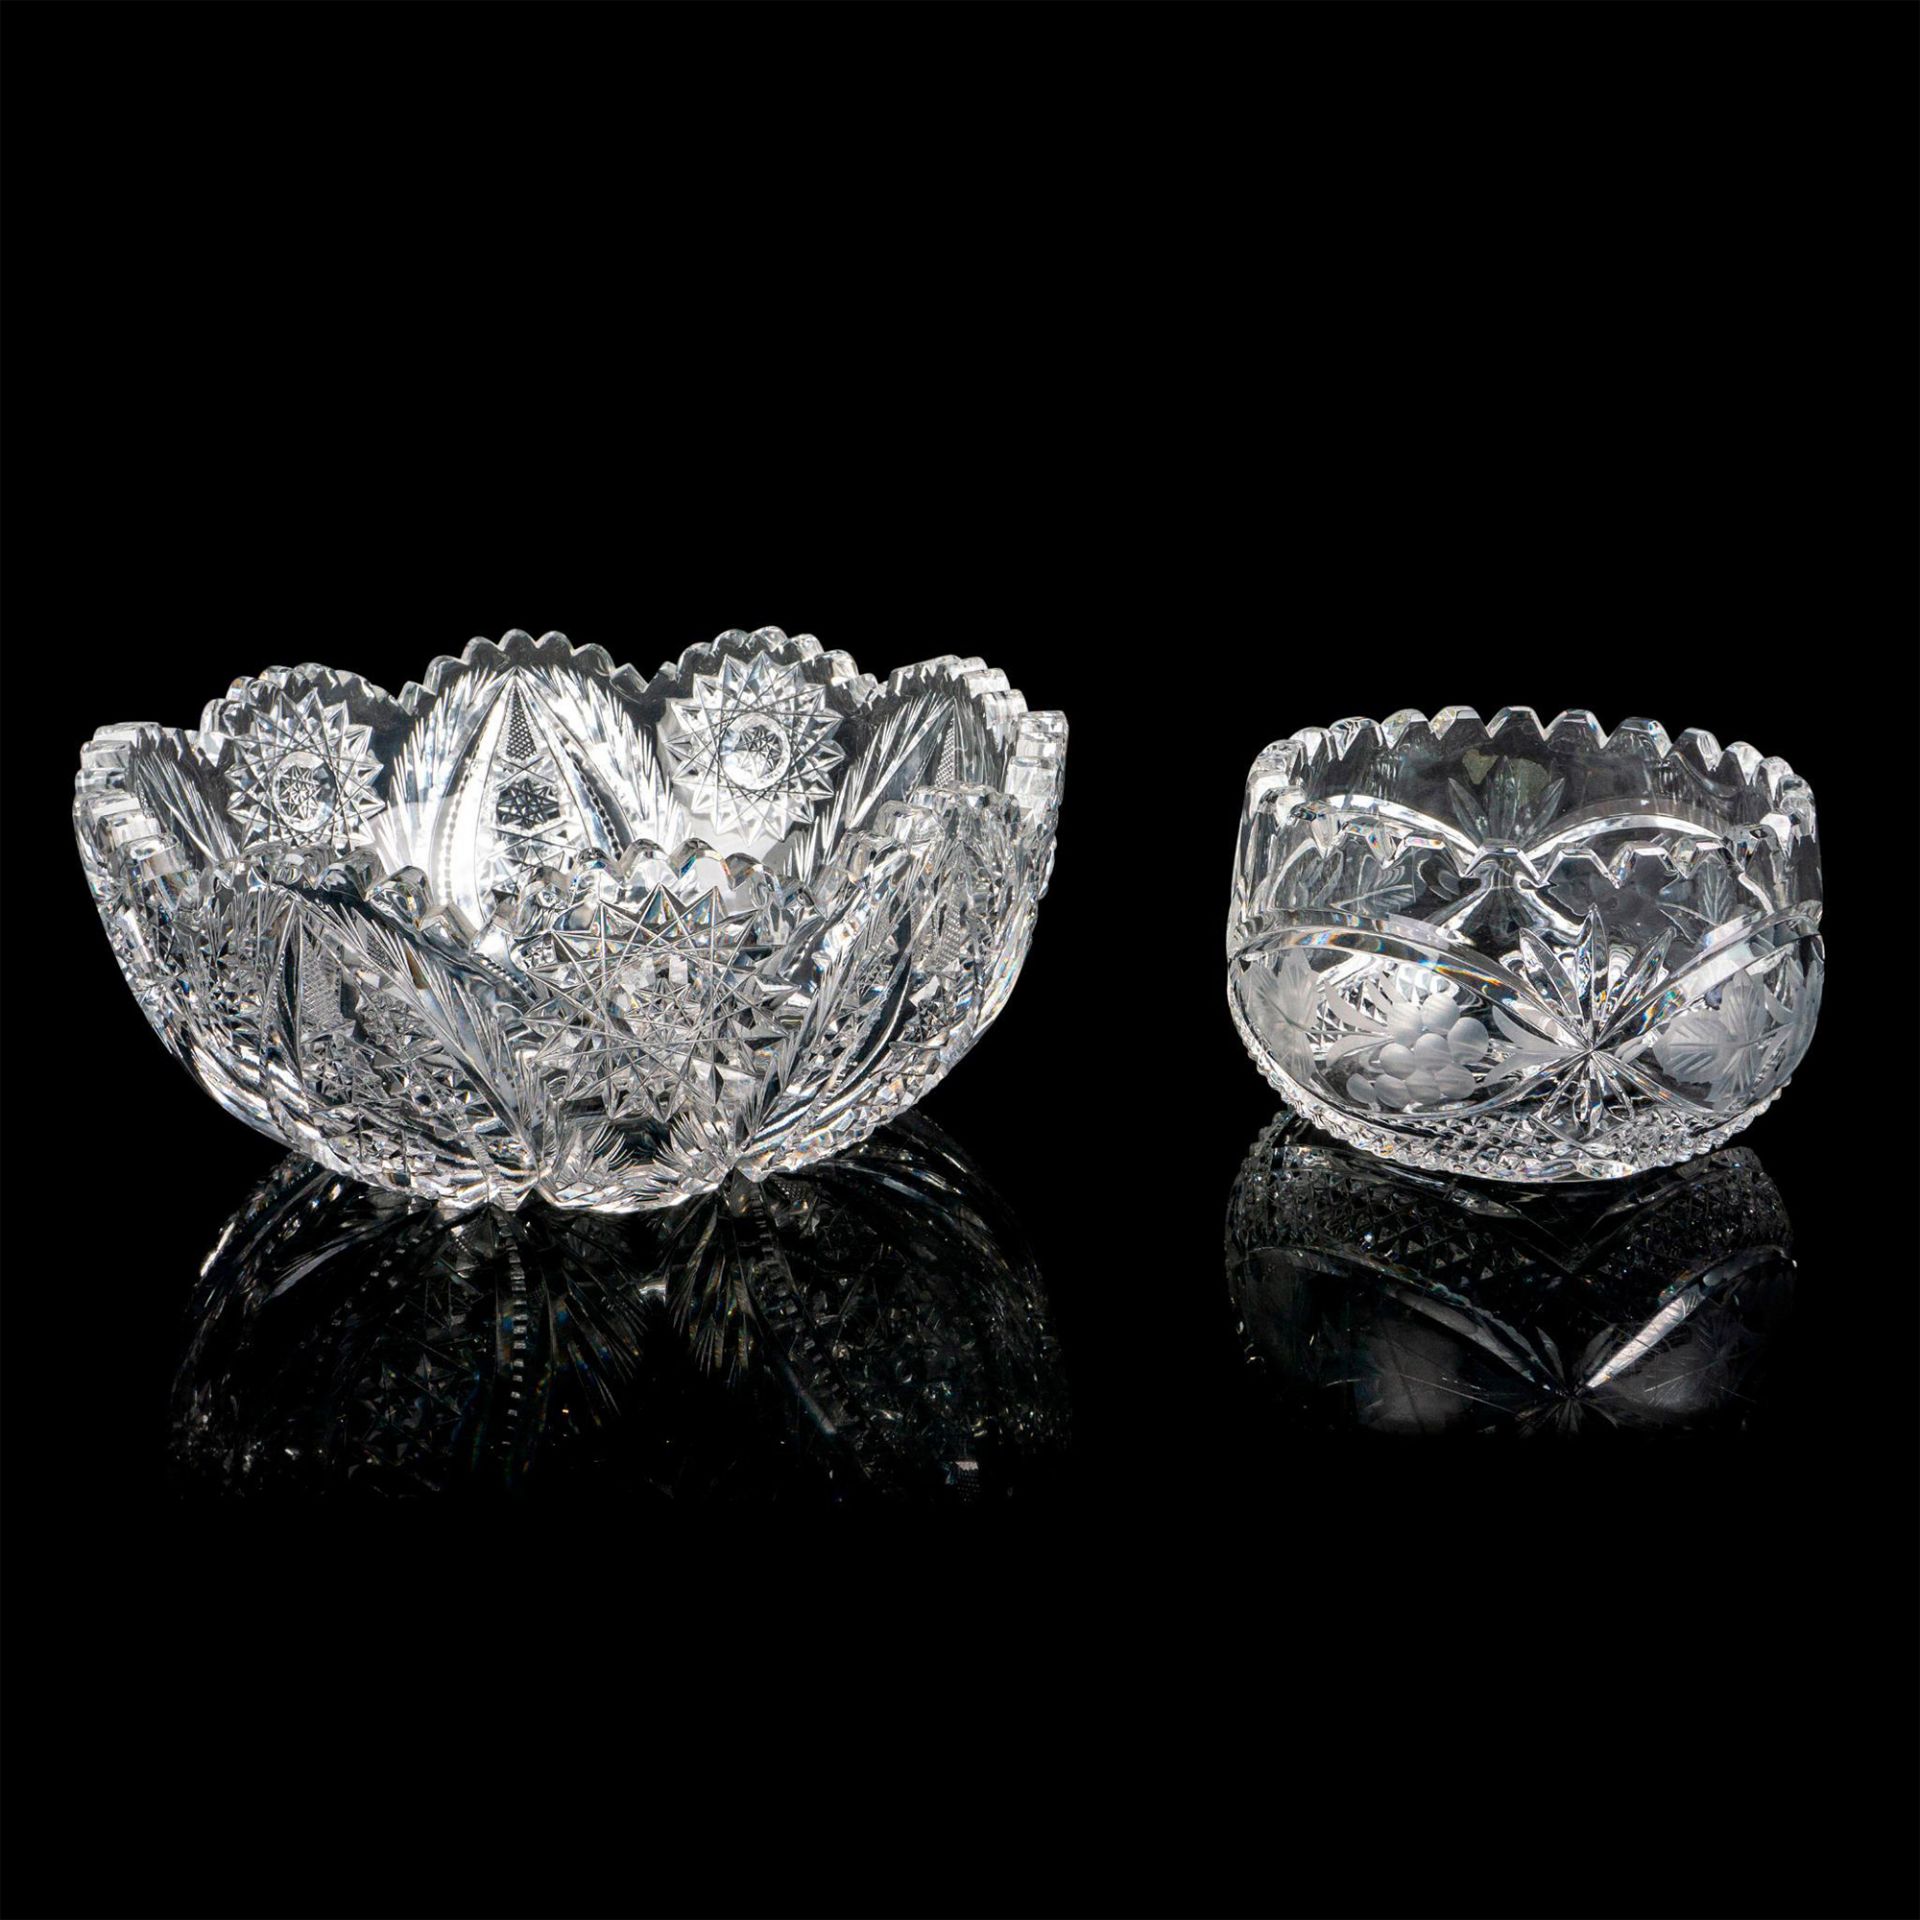 2pc American Brilliant Crystal Fruit and Nut Bowl Set - Image 2 of 3